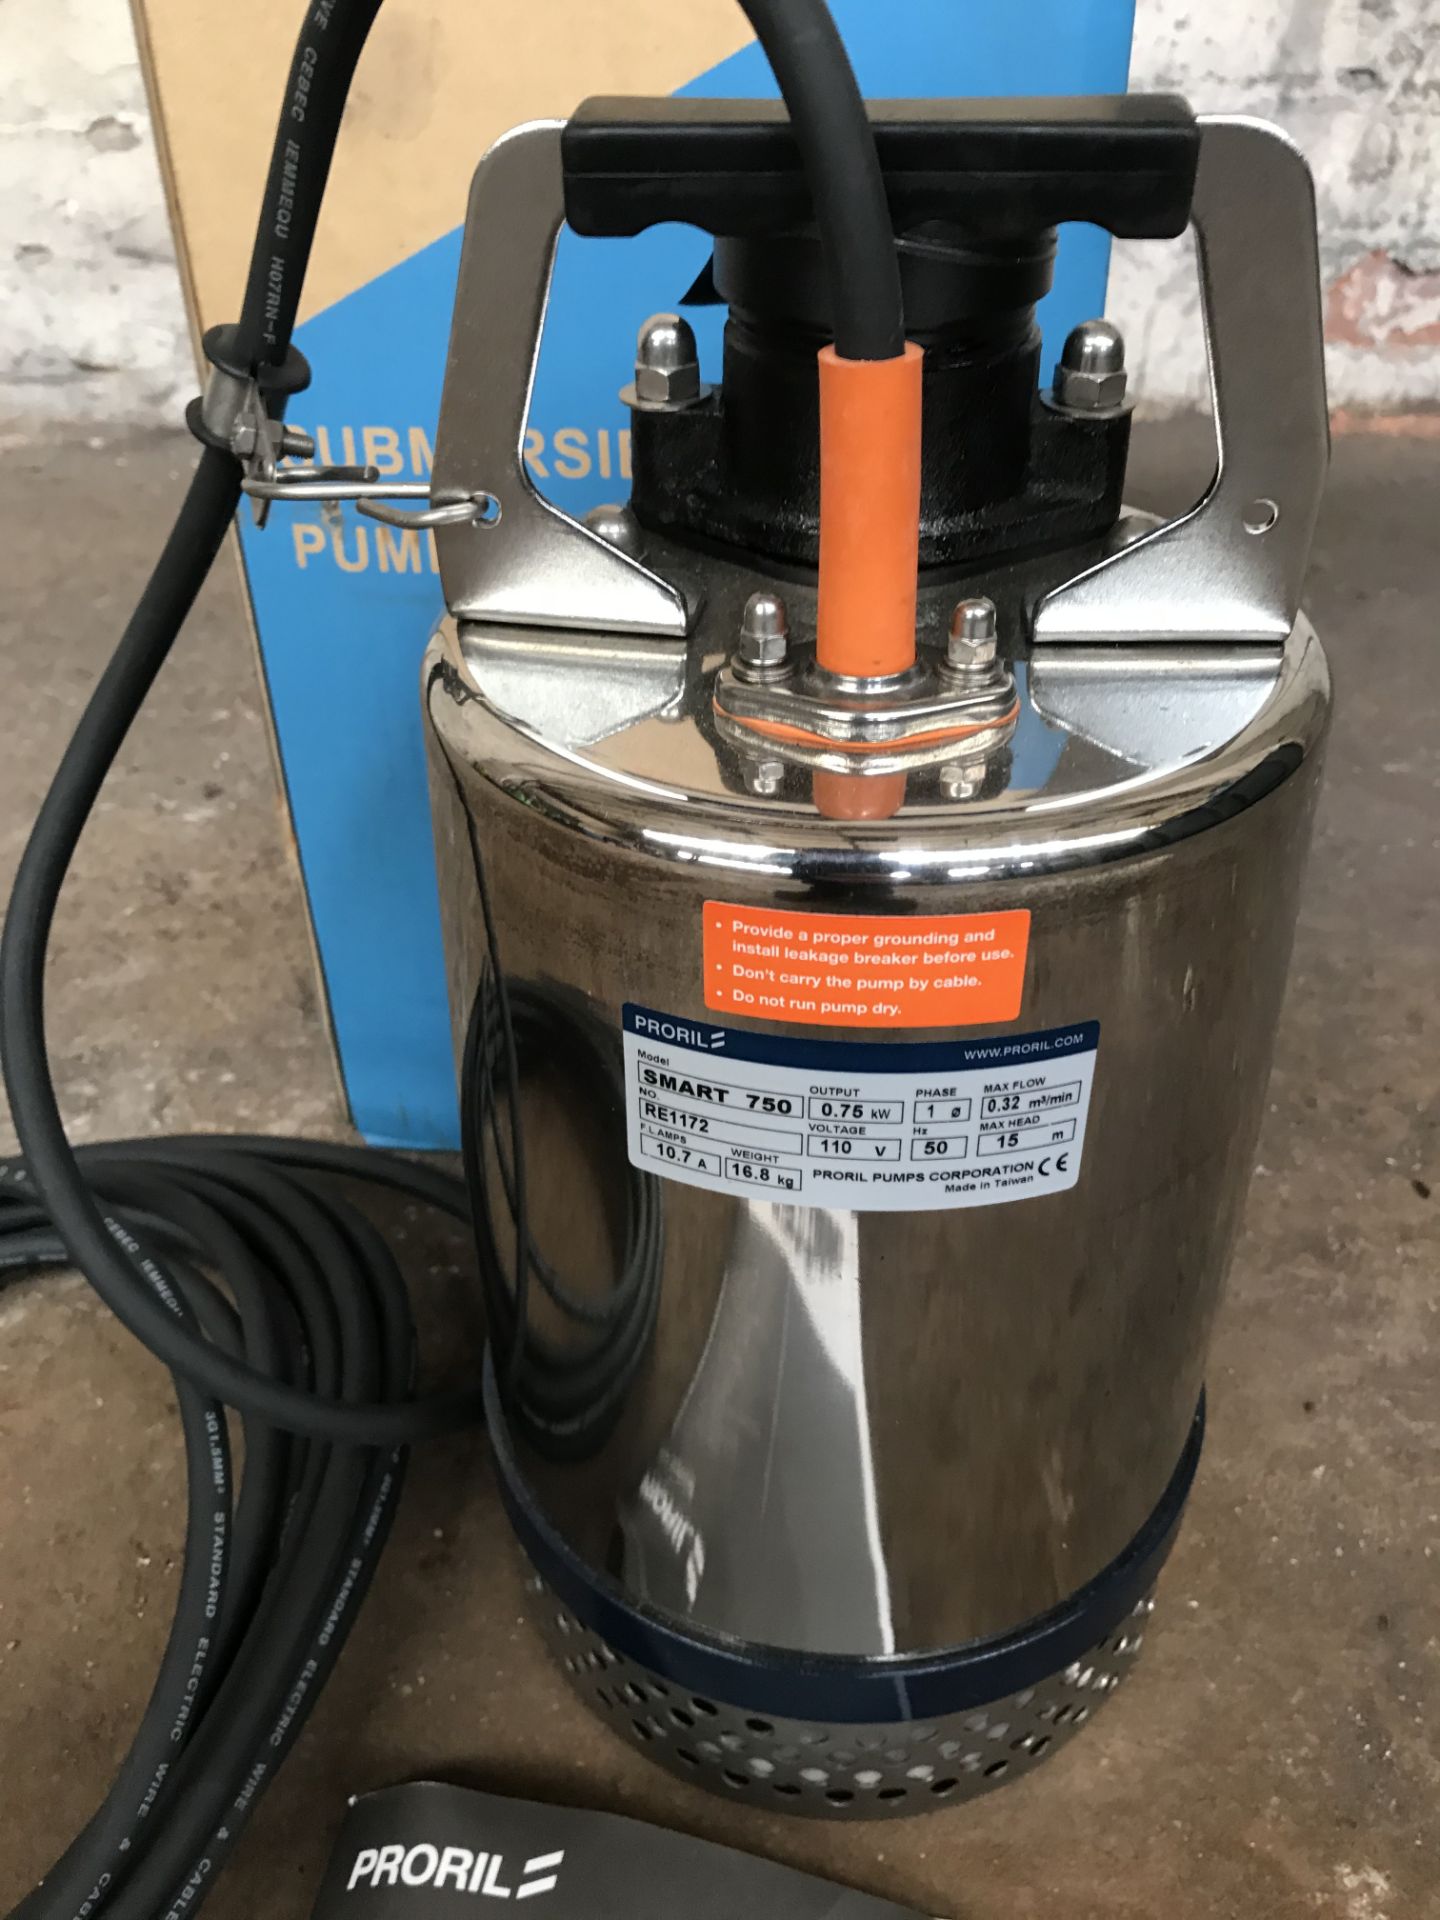 Unused Proril SMART 750 Submersible Drainer Pump | 110v | Ref: RE1172 - Image 6 of 7